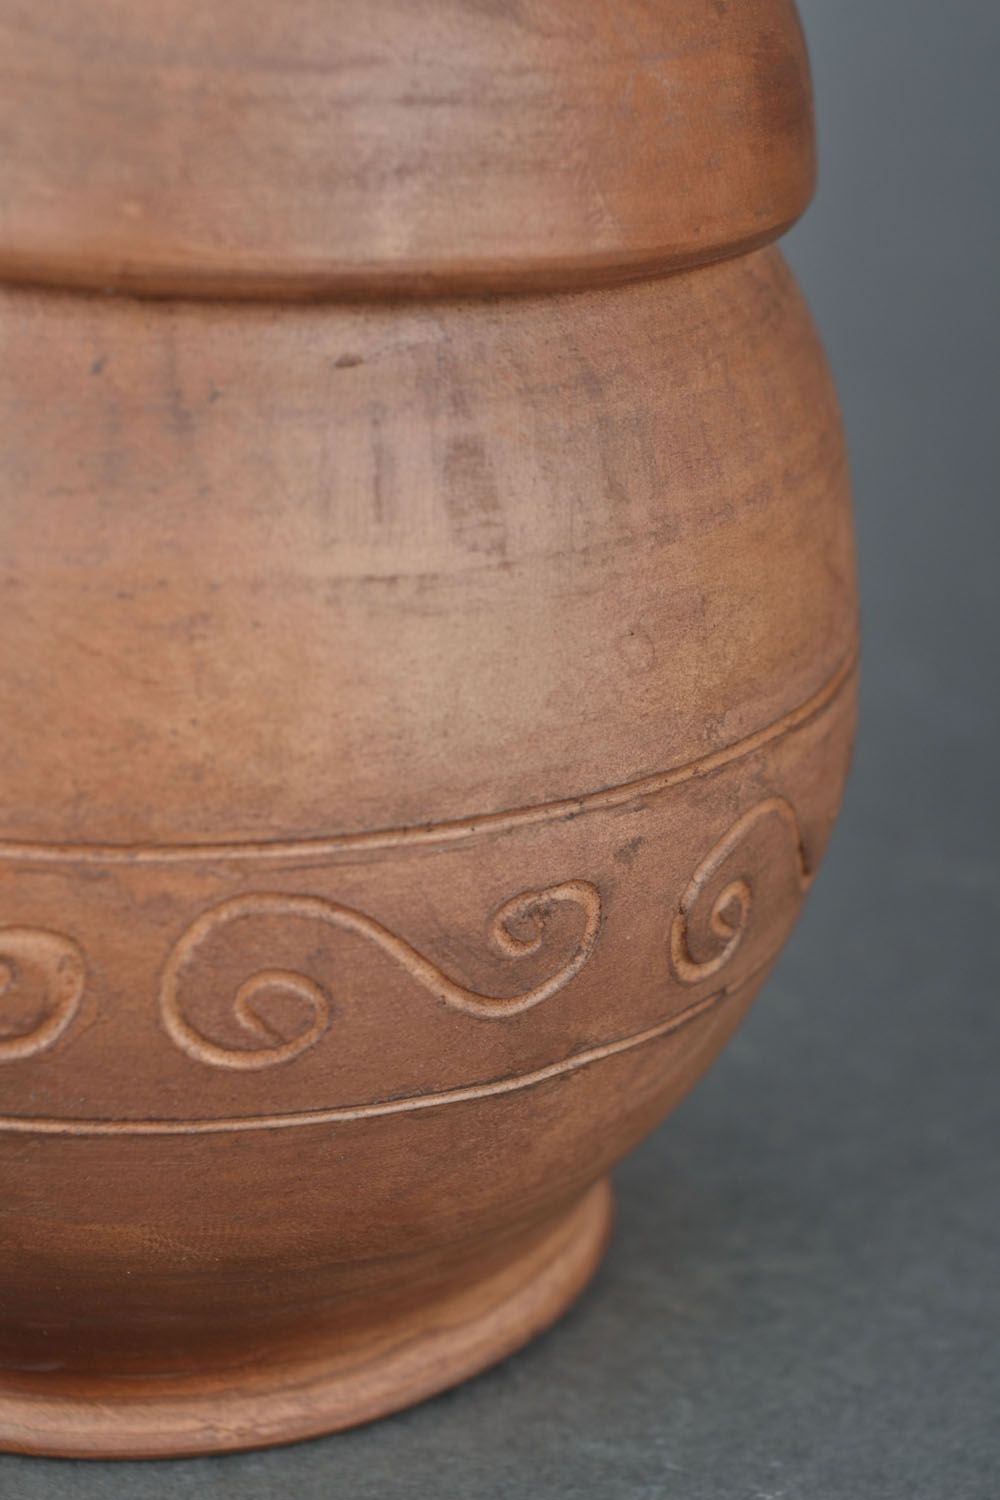 Clay pot for baking photo 5